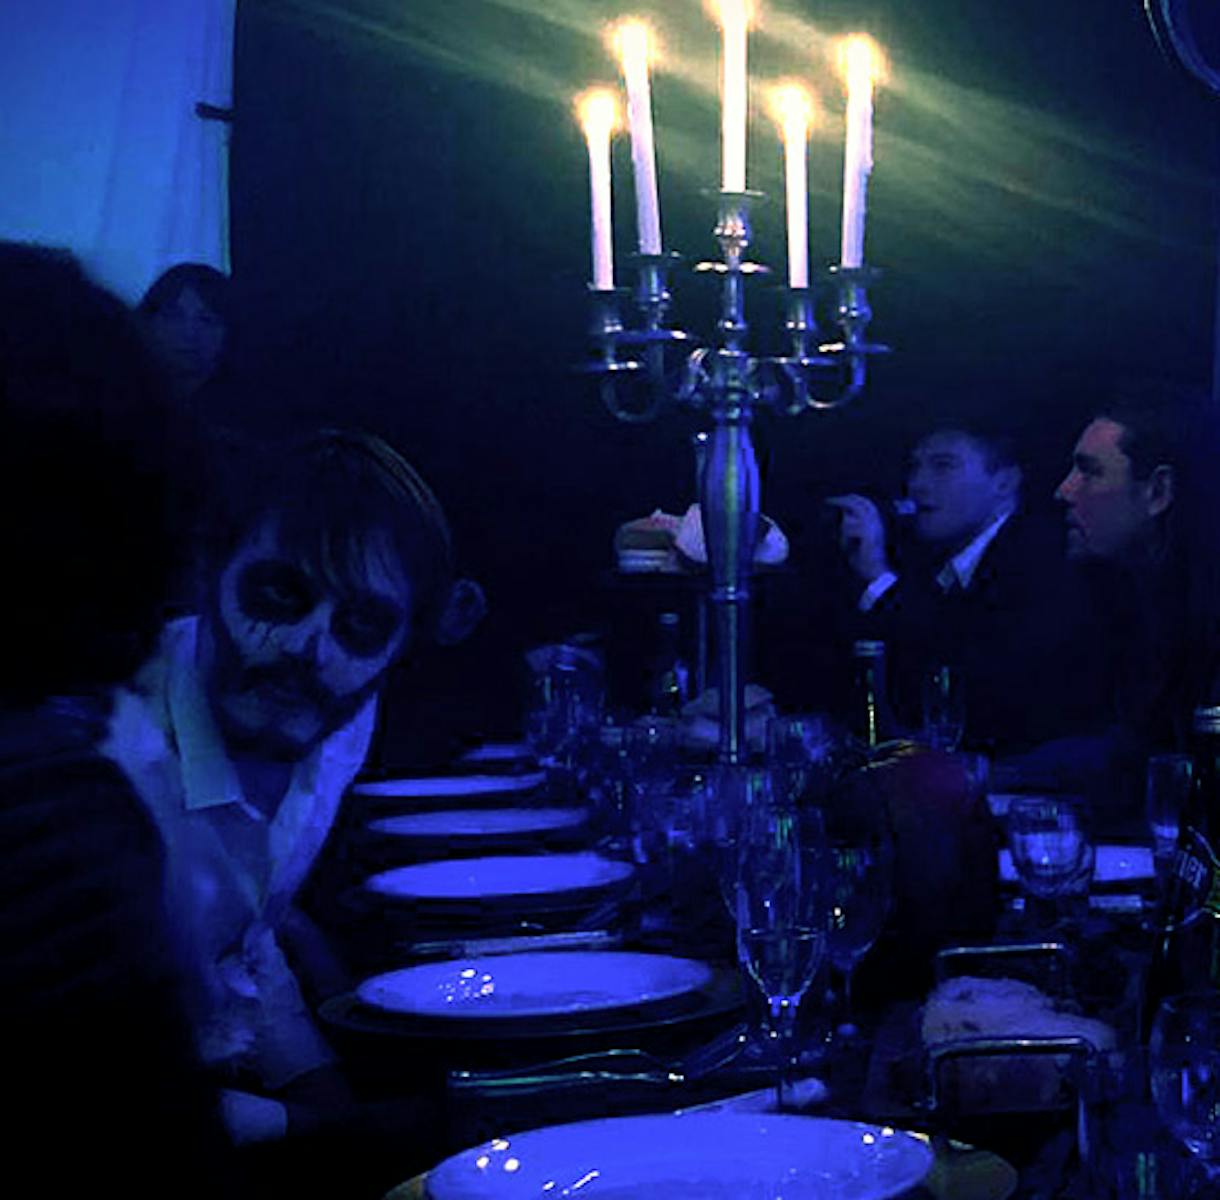 Food at Dead Northern Horror Prom